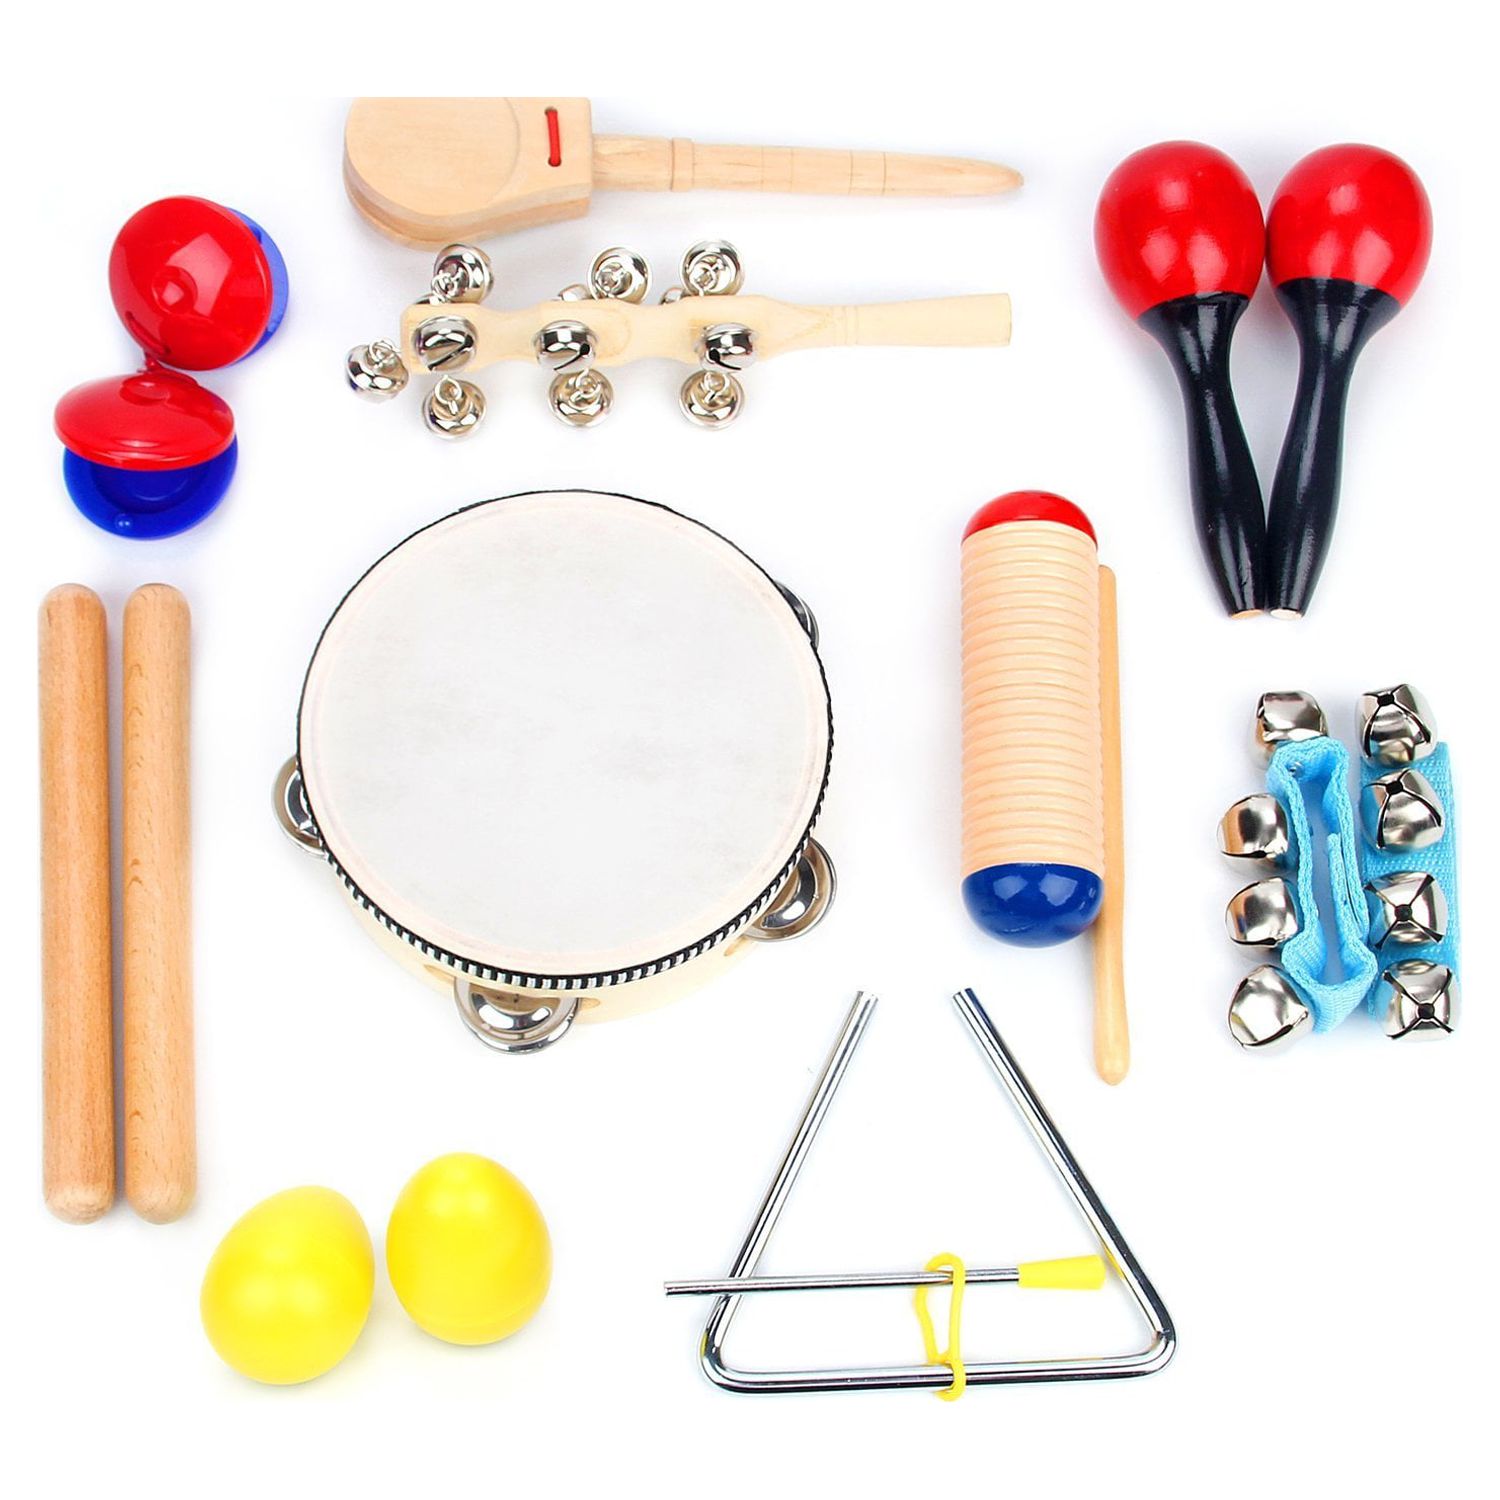 Musical Instruments Set of 16 PCS by Boxiki Kids. Rhythm & Musical Toys for Toddlers 1-3 Years Old. Includes Clave Sticks, Shakers, Tambourine, Wrist Bells & Maracas for Kids. - image 1 of 15